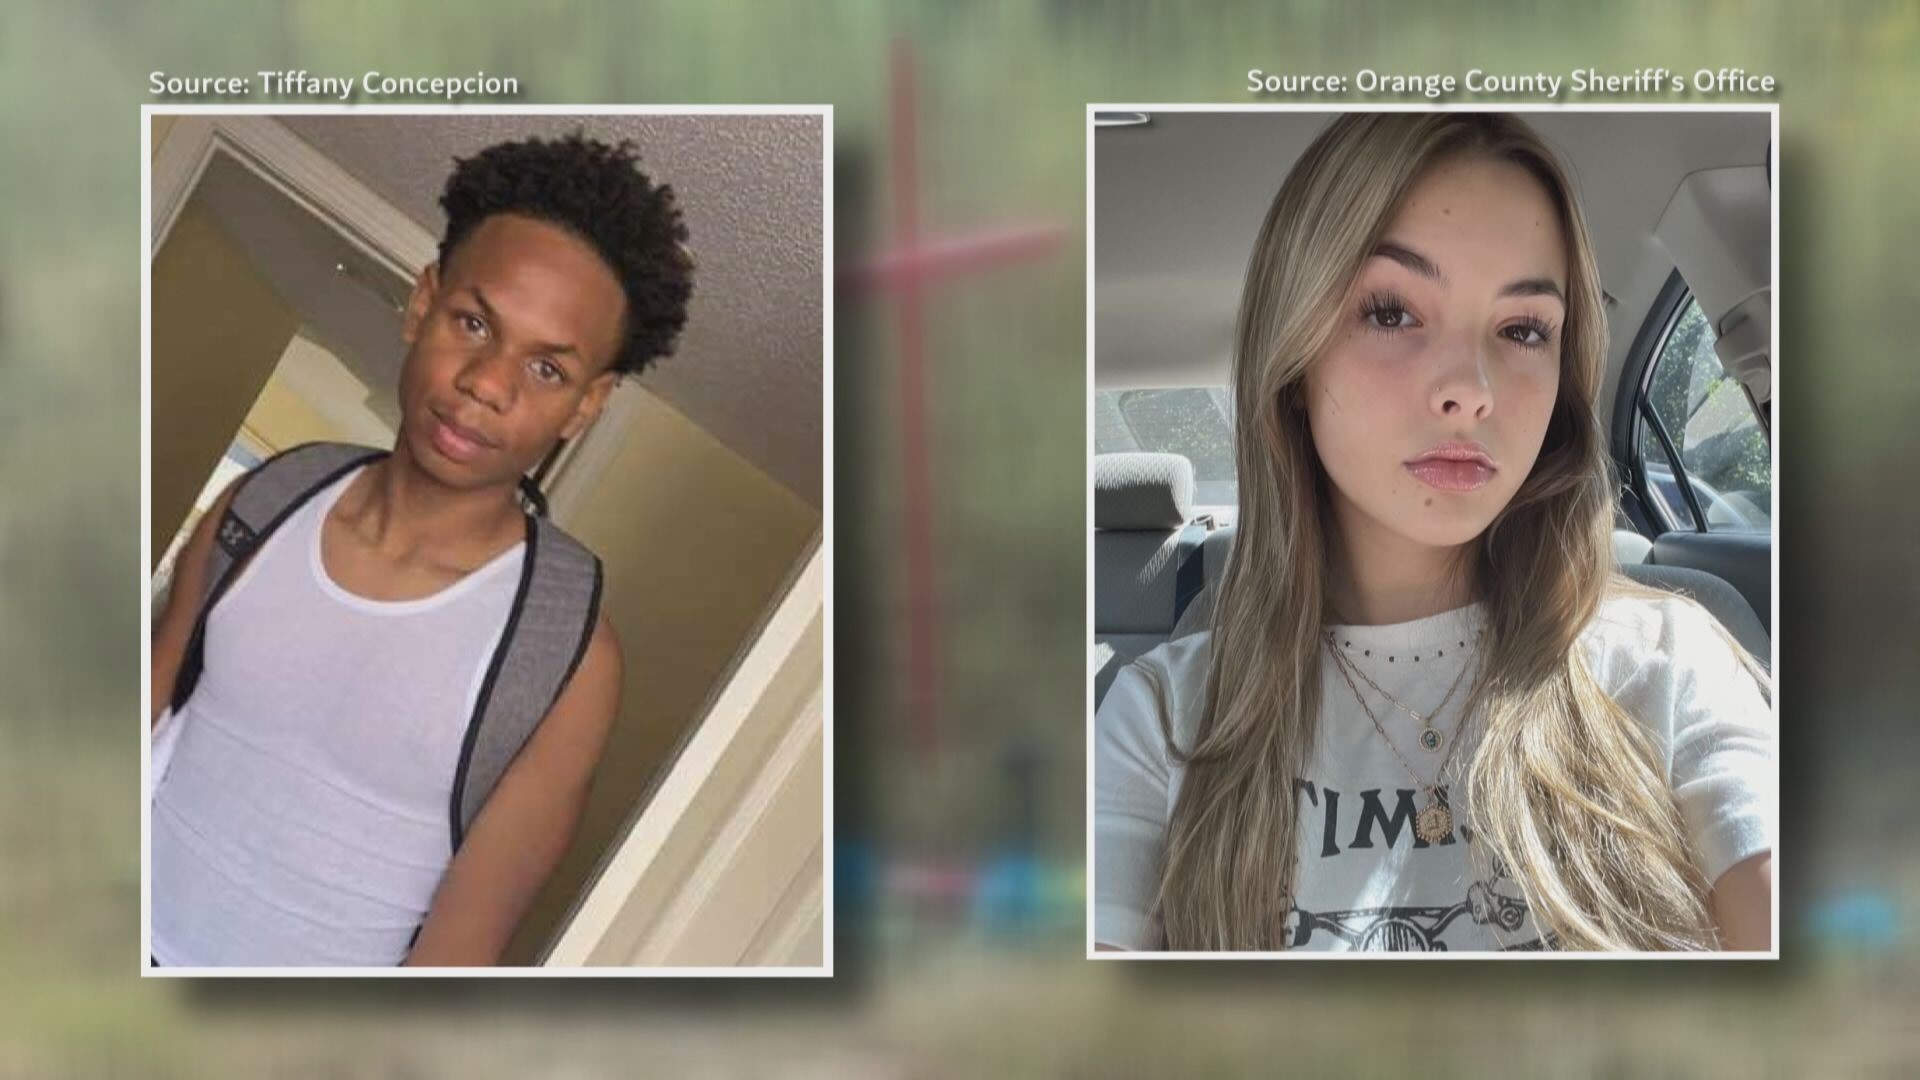 Deputies detained a juvenile in connection to the murders of Devin Clark and Lyric Woods. Investigators found their bodies shot to death several weeks ago.